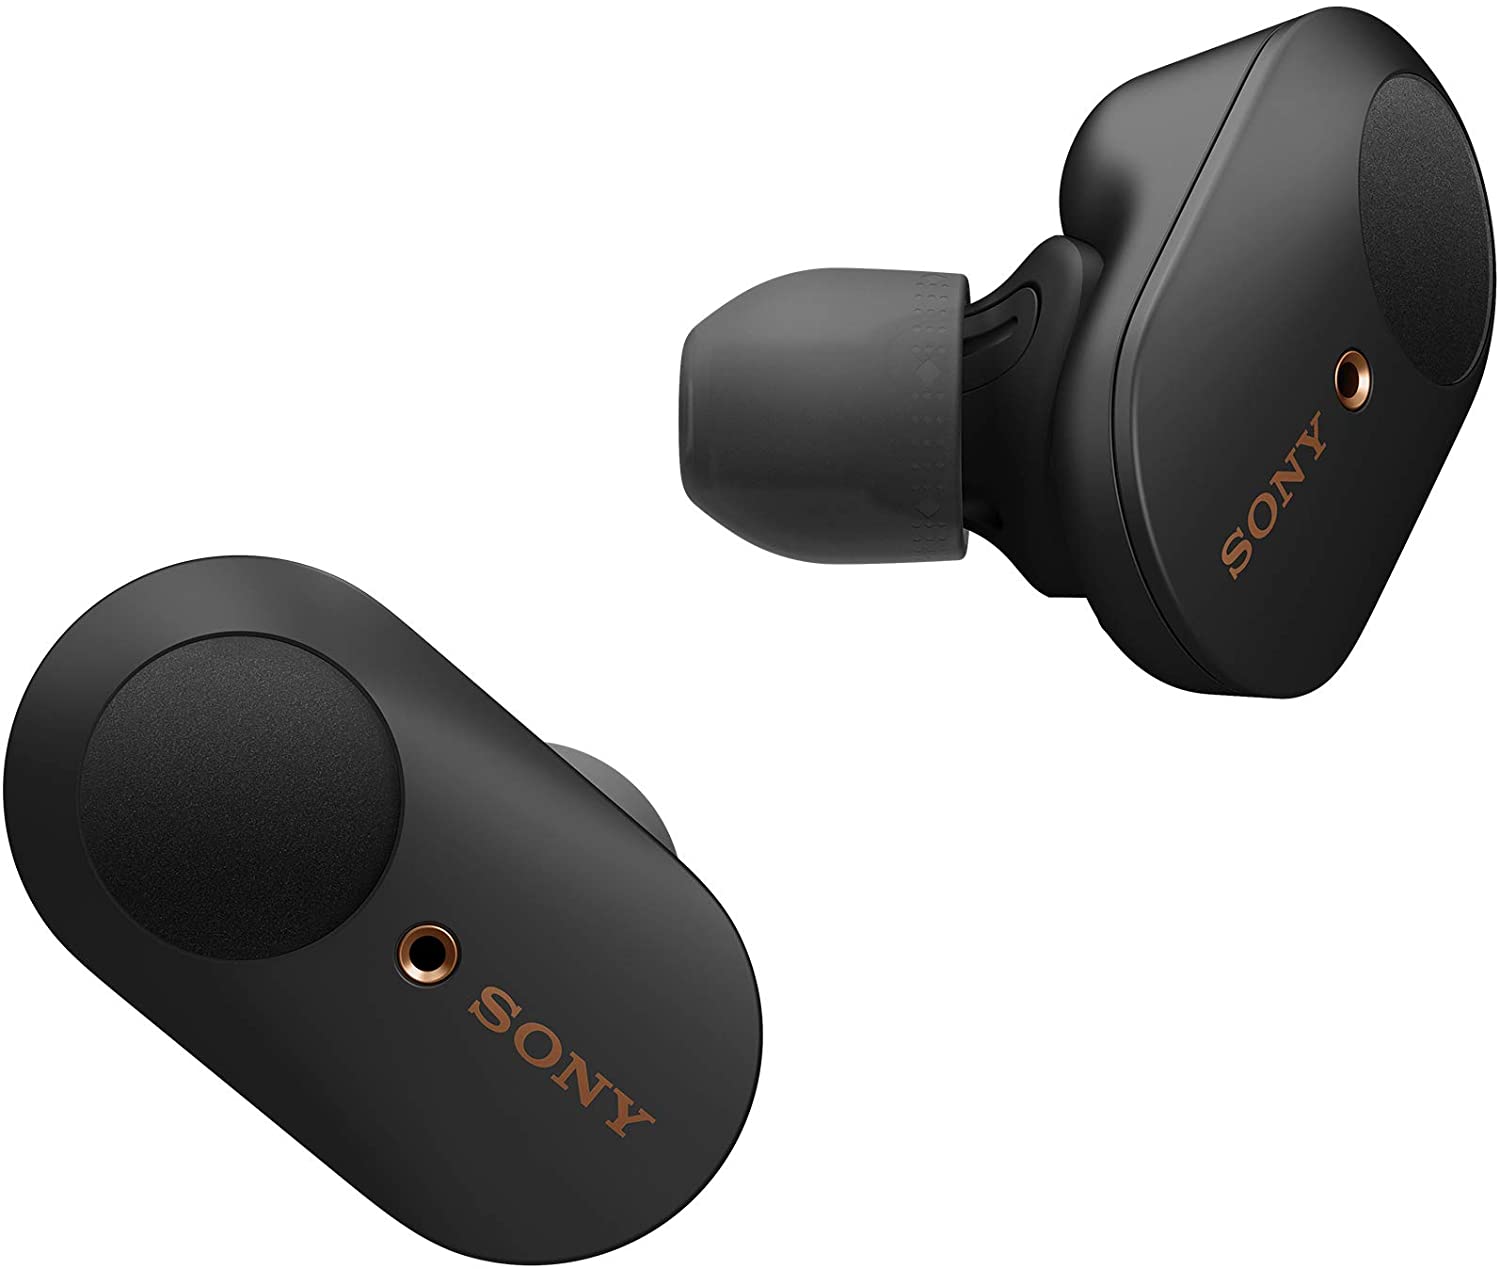 Review of Sony WF-1000XM3 Noise Canceling Truly Wireless Earbuds